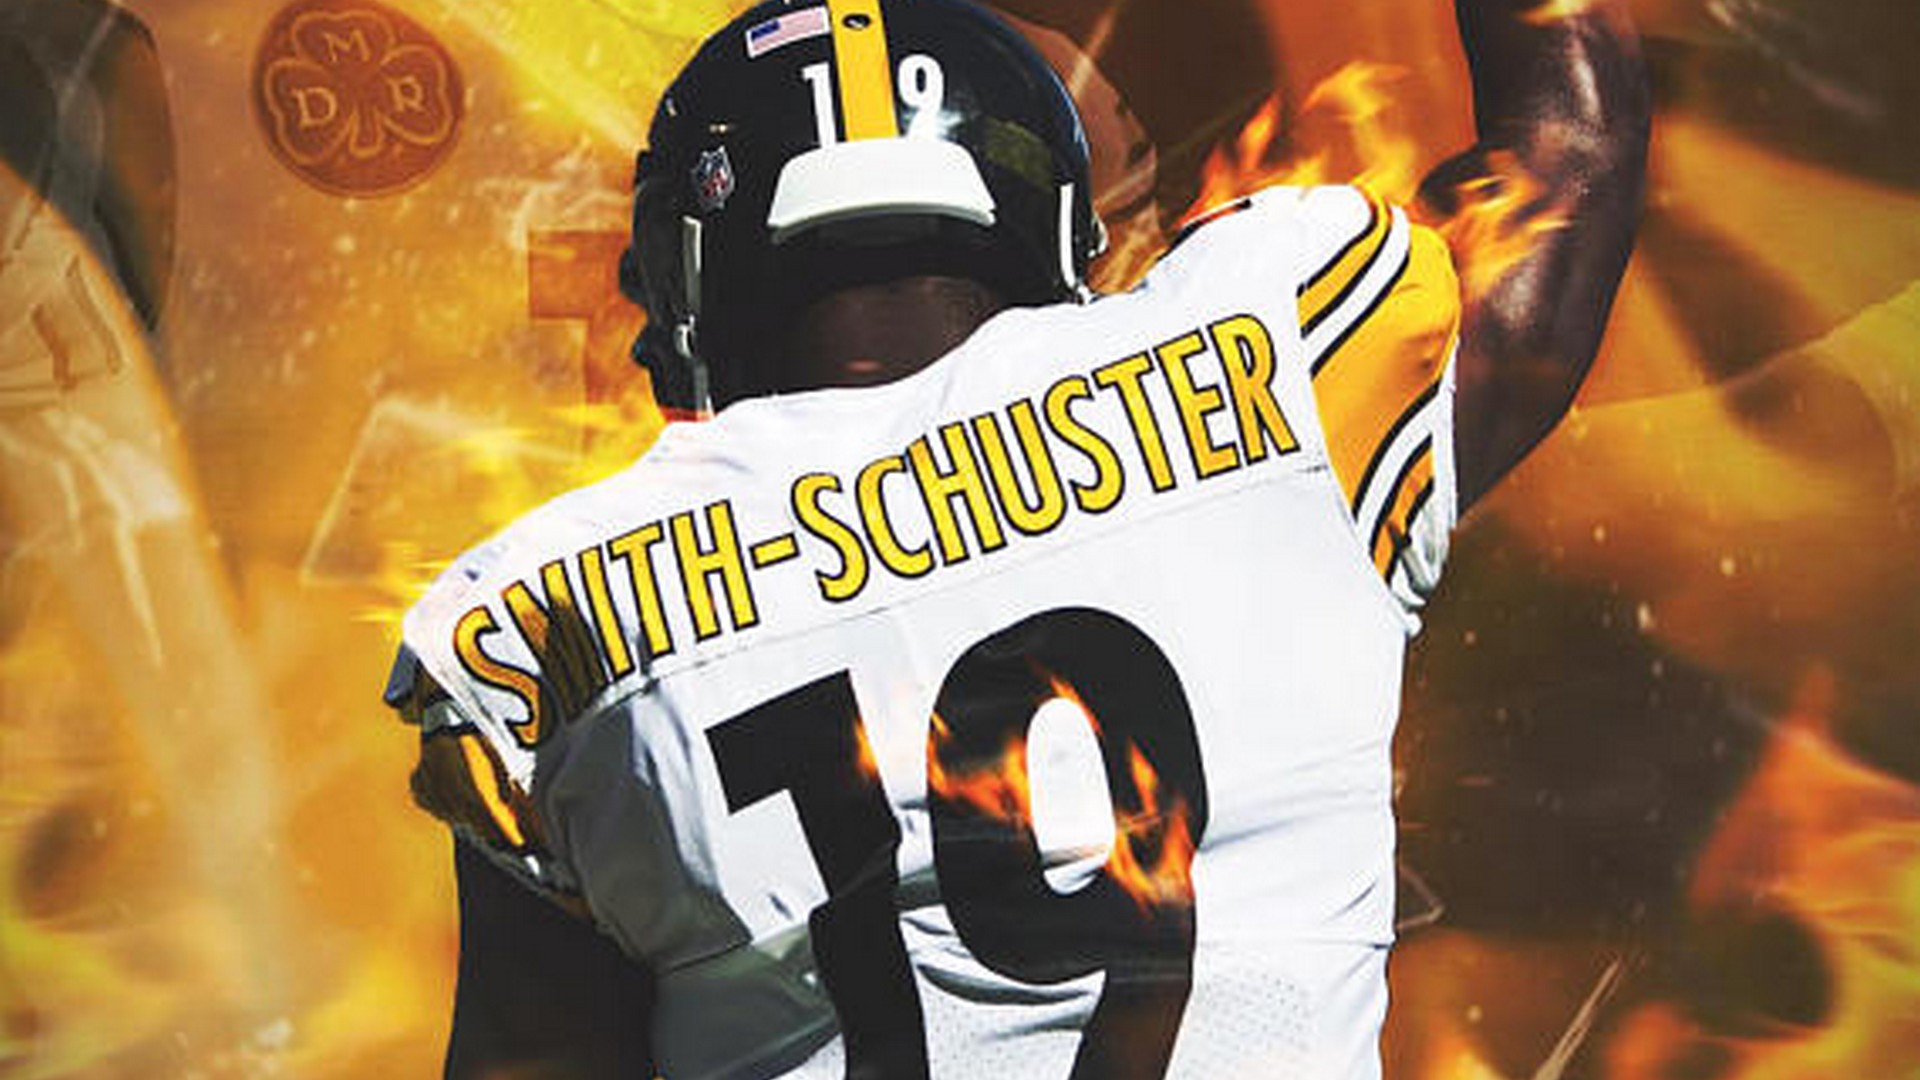 Wallpapers HD Steelers Super Bowl with resolution 1920x1080 pixel. You can make this wallpaper for your Mac or Windows Desktop Background, iPhone, Android or Tablet and another Smartphone device